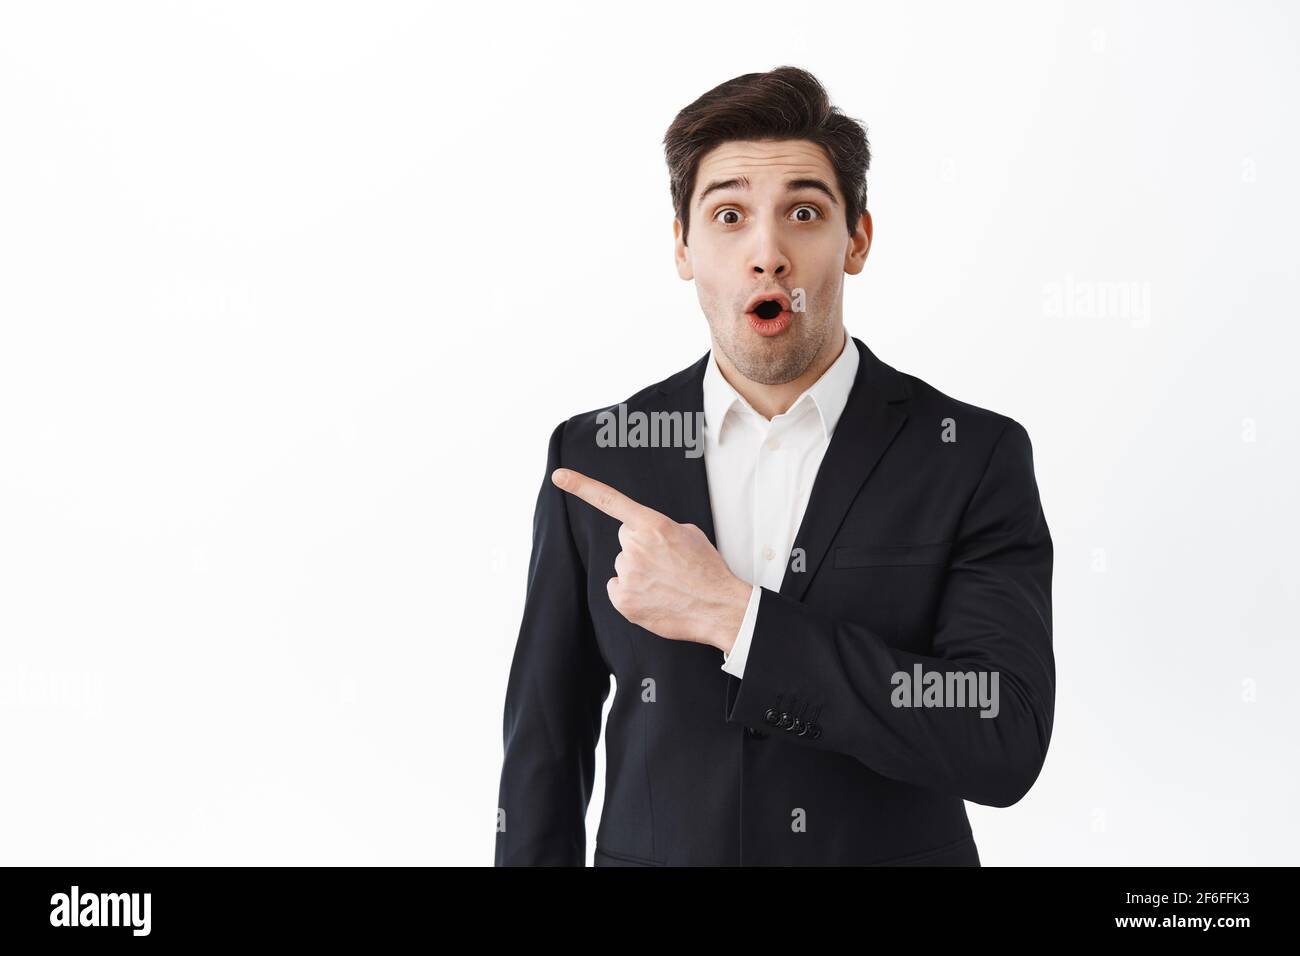 Surprised real estate agent, entrepreneur corporate man make wow face, look intrigued and amazed, pointing aside at logo, show banner, standing over Stock Photo